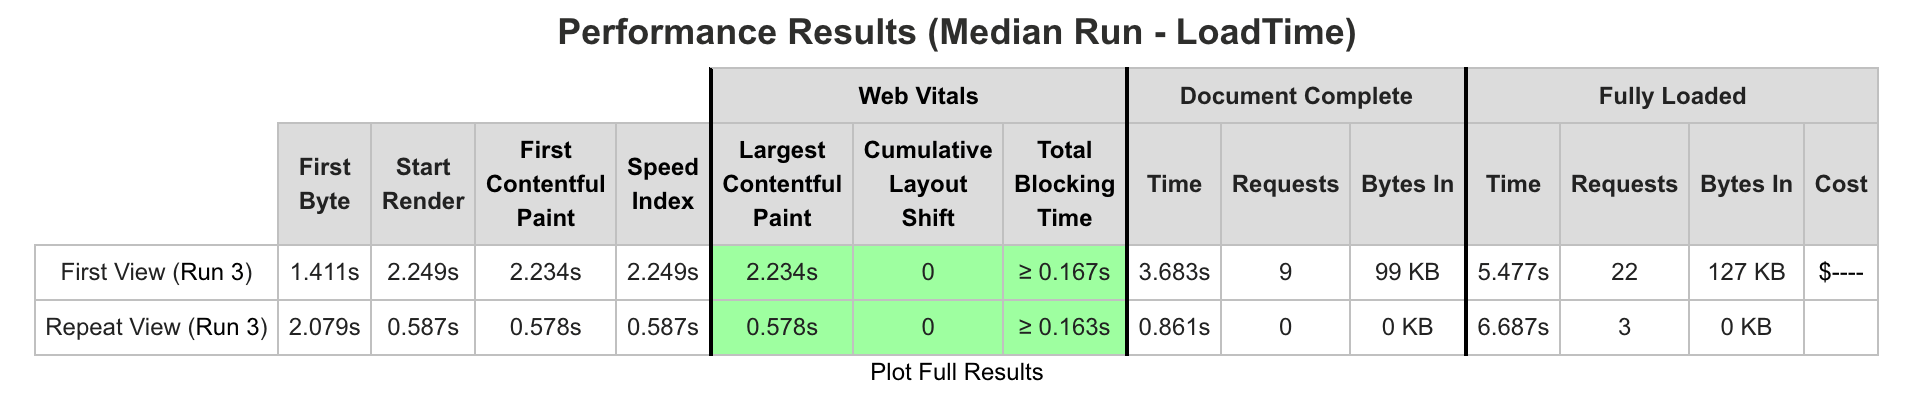 Performance results summary using the load time to select the median run.